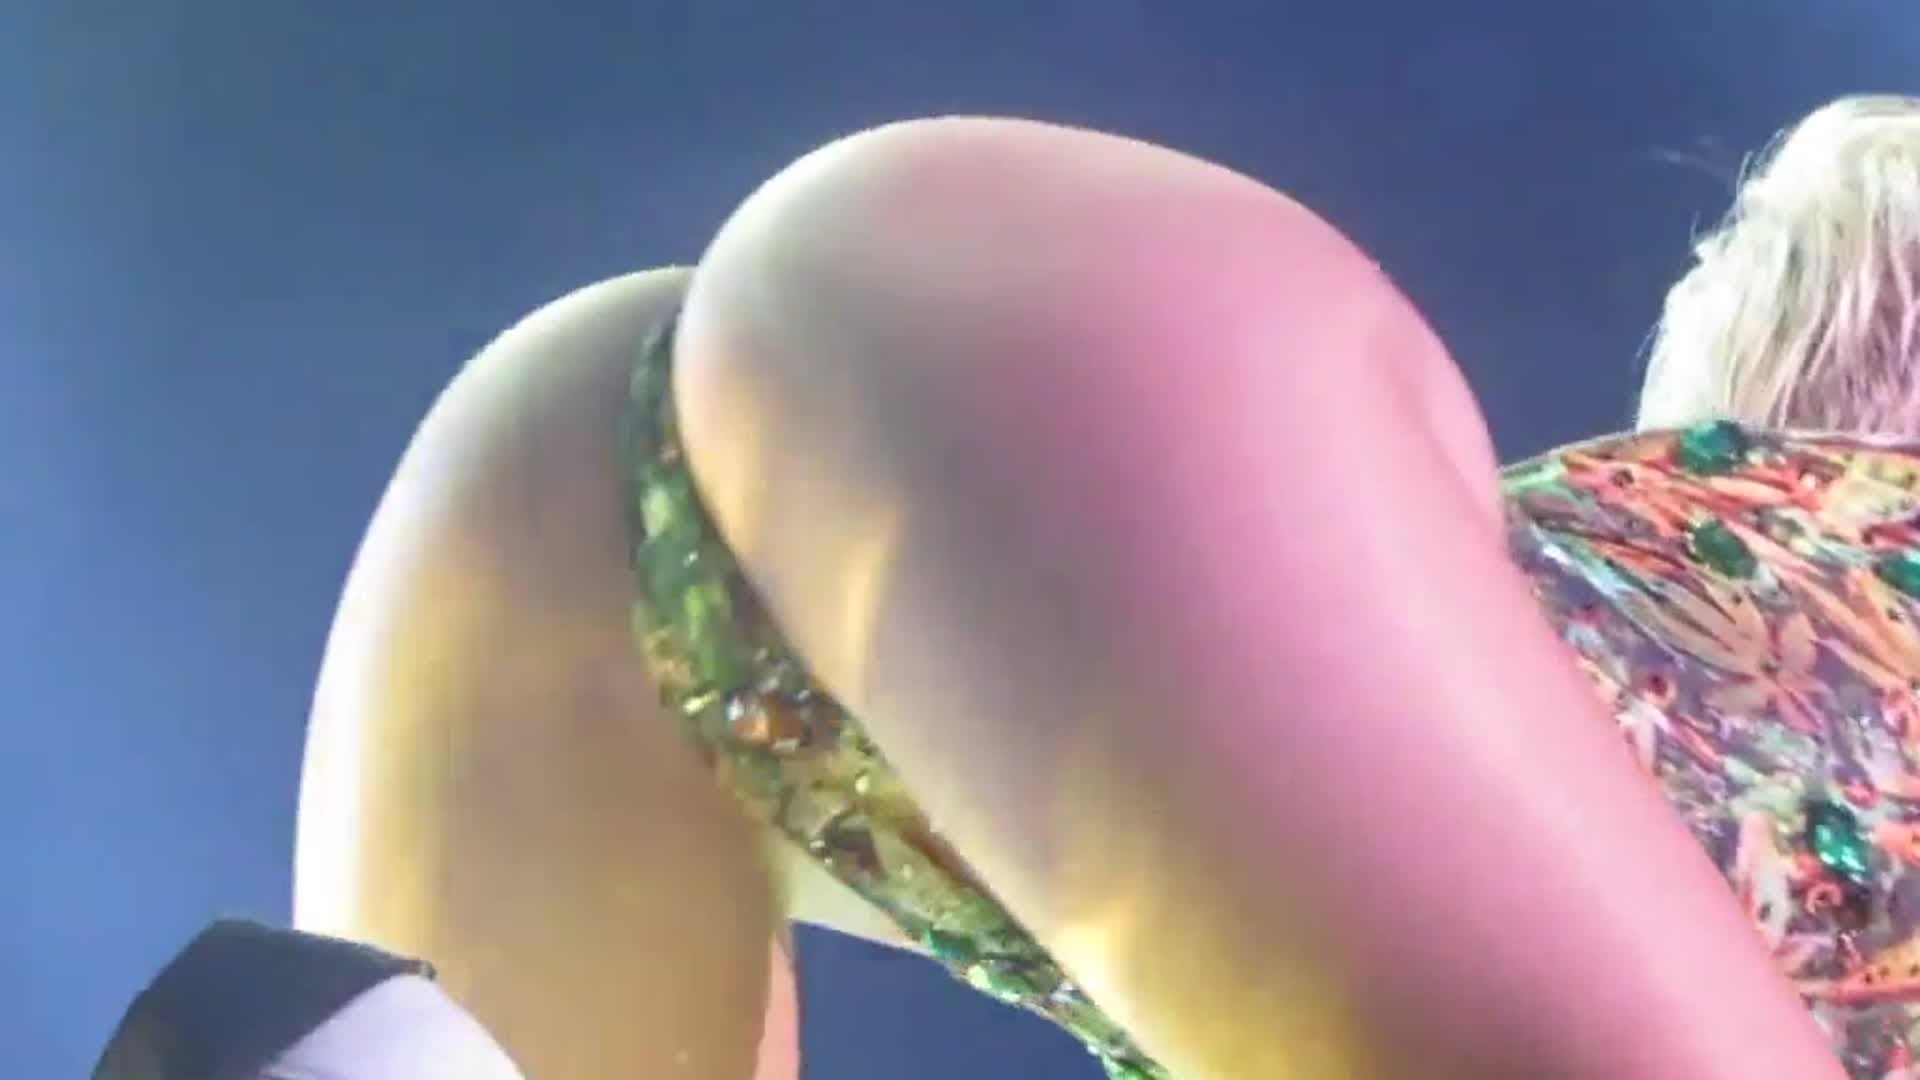 andy sacks recommends miley cyrus butthole pic